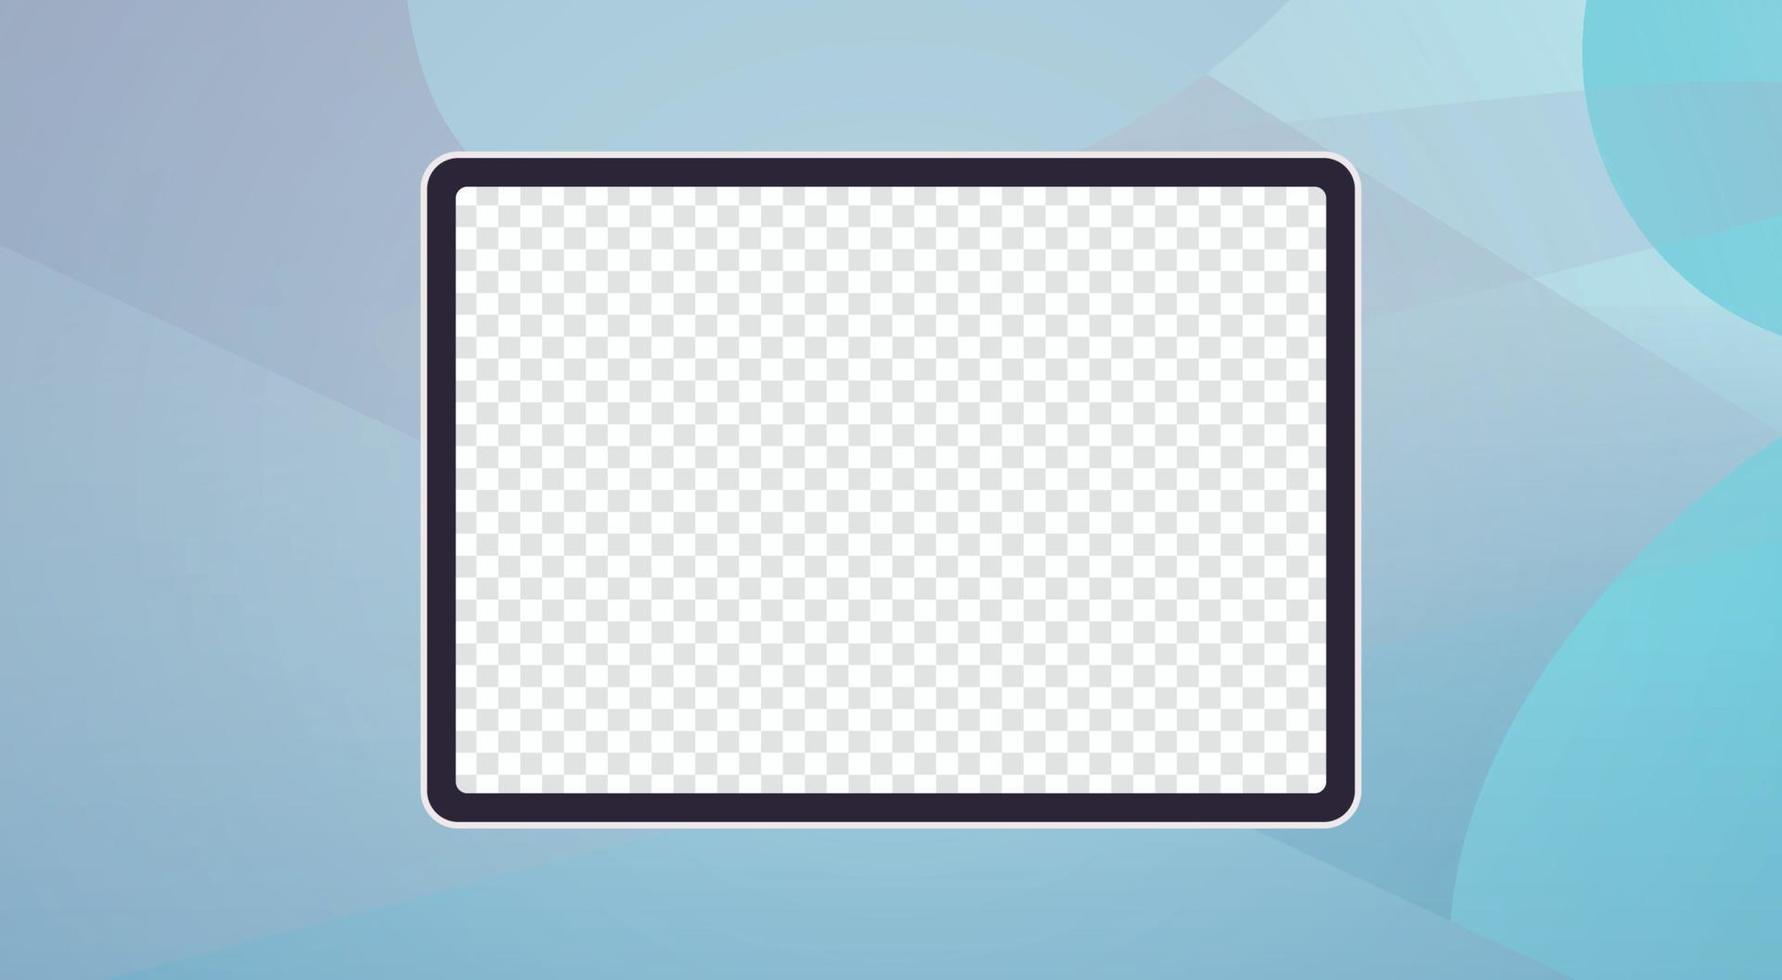 Mockup concept and tablet device empty screen front view flat vector illustration.